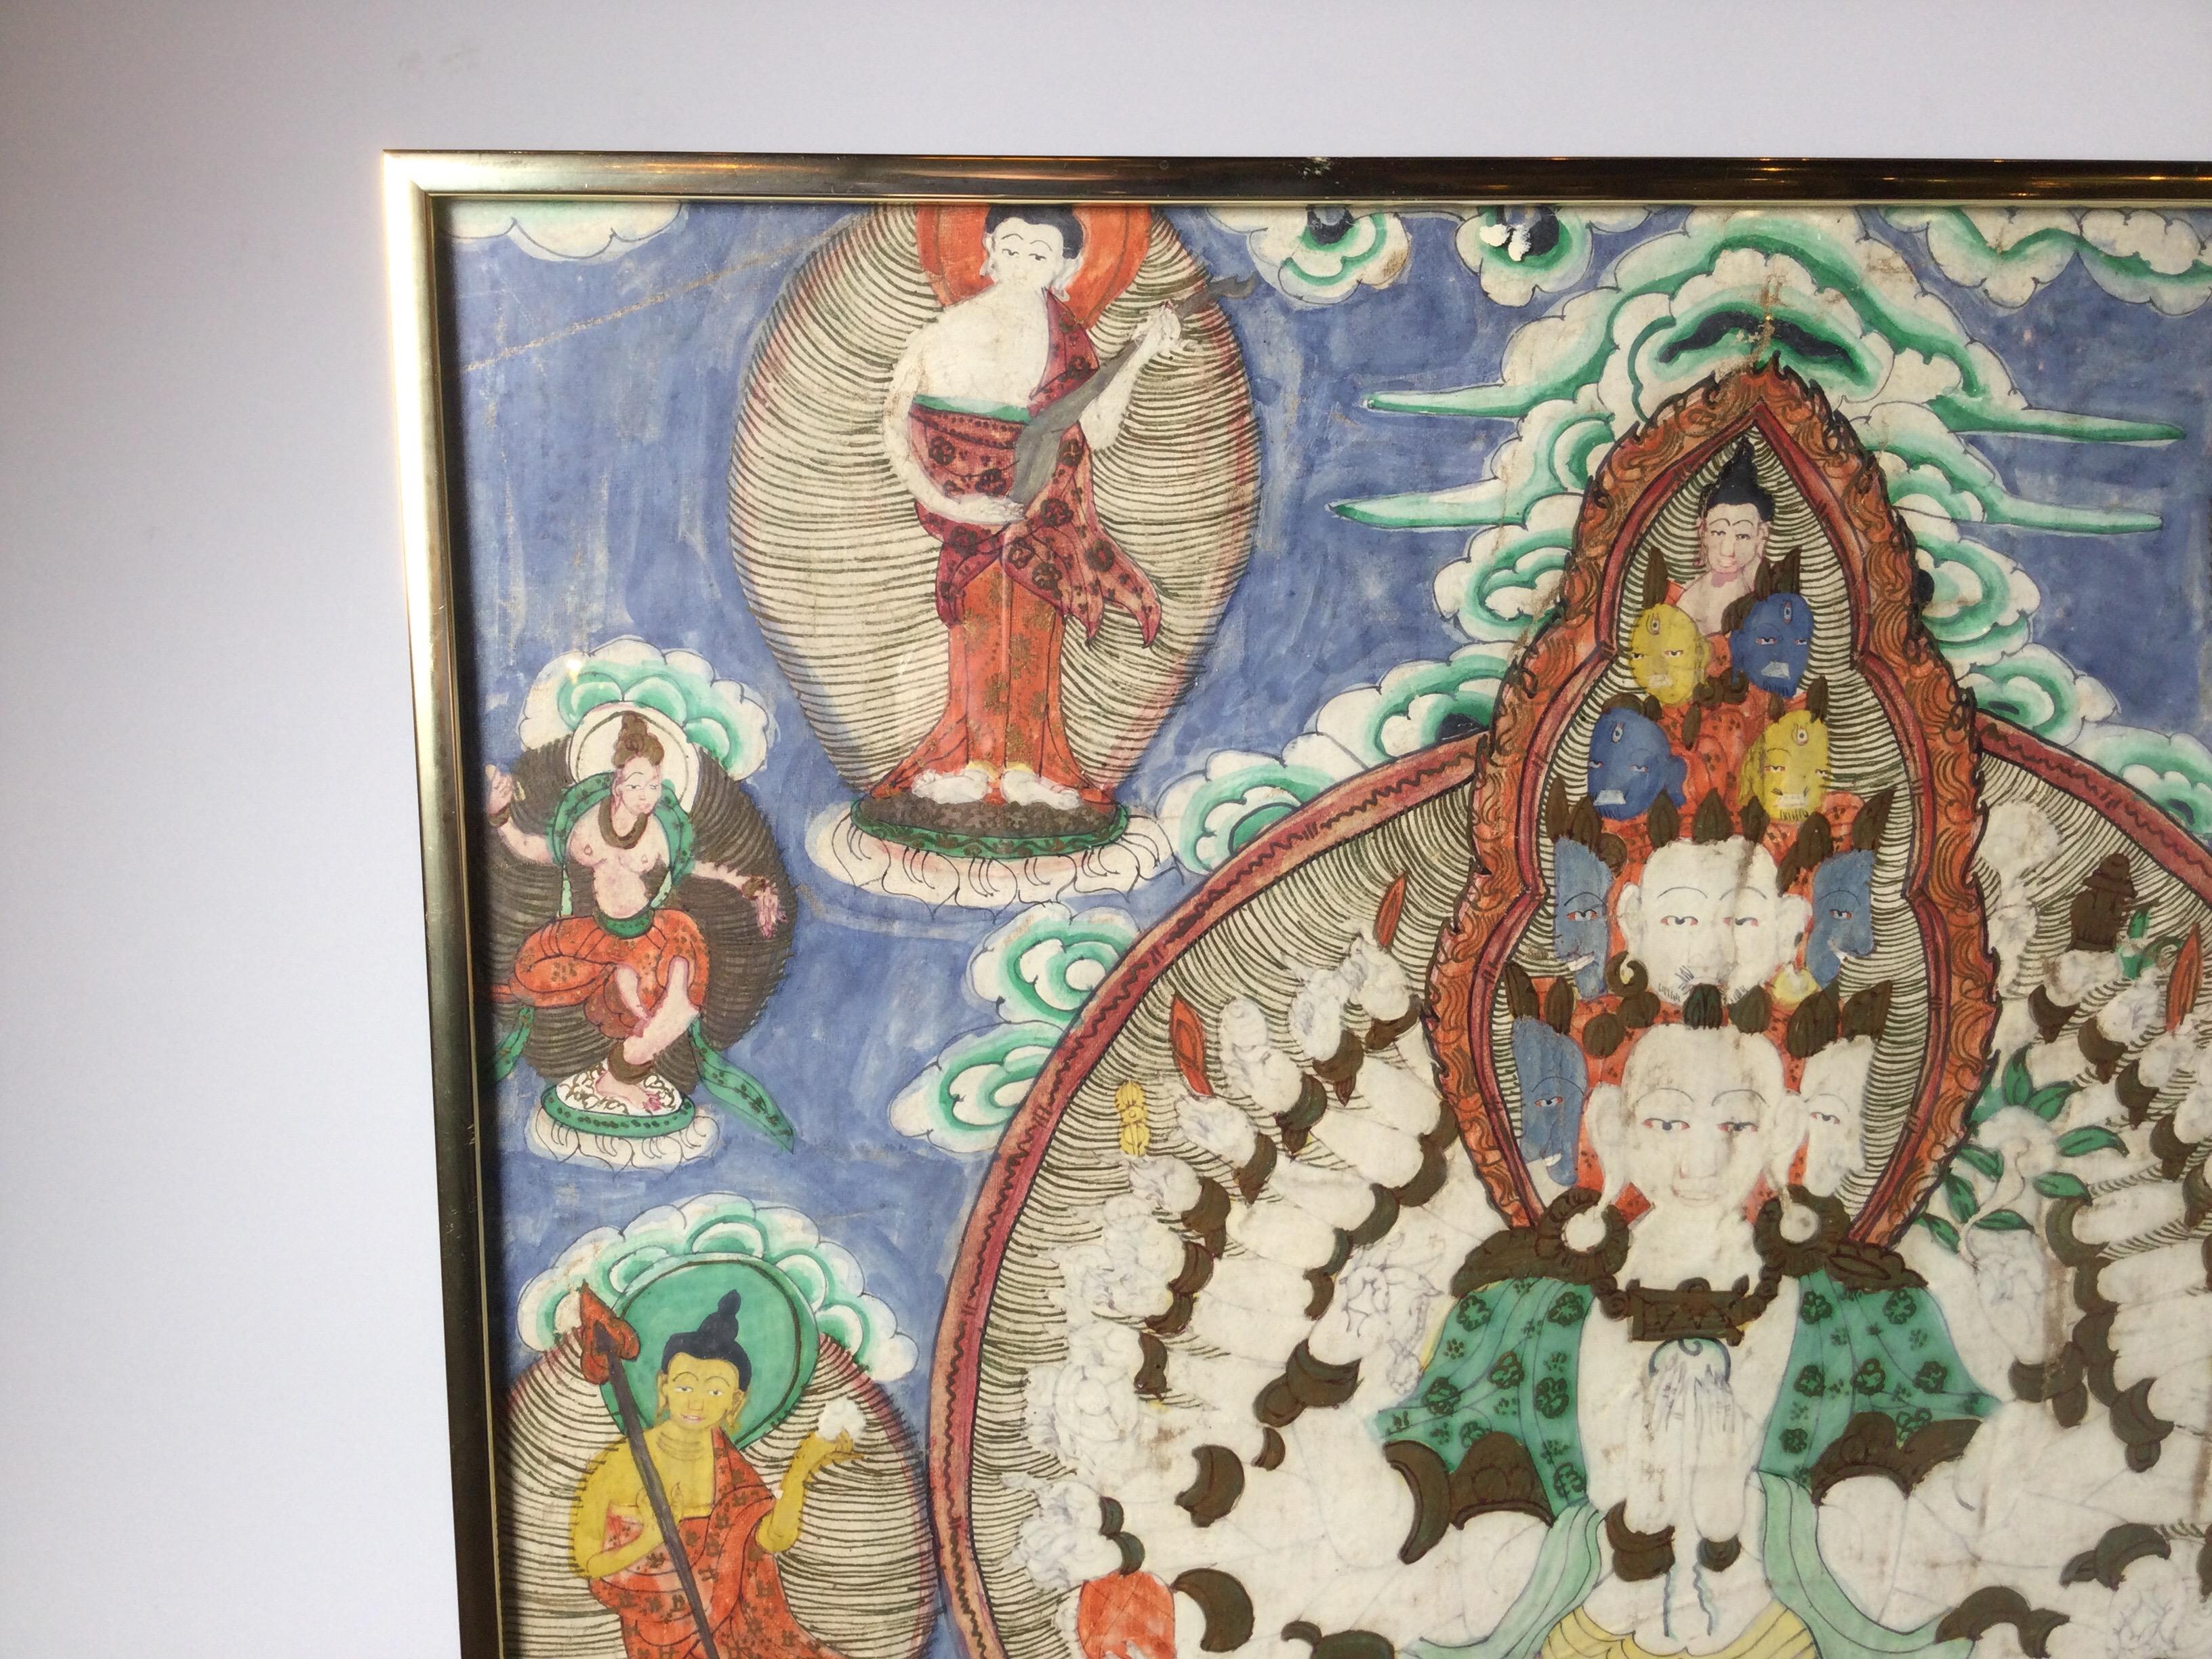 A vibrantly colored Tibetan Thangka of a multi armed Deity, Tibet Circa 1900, framed in a gold tone frame under glass, Measures: 28 inches tall, 30.75 inches wide.